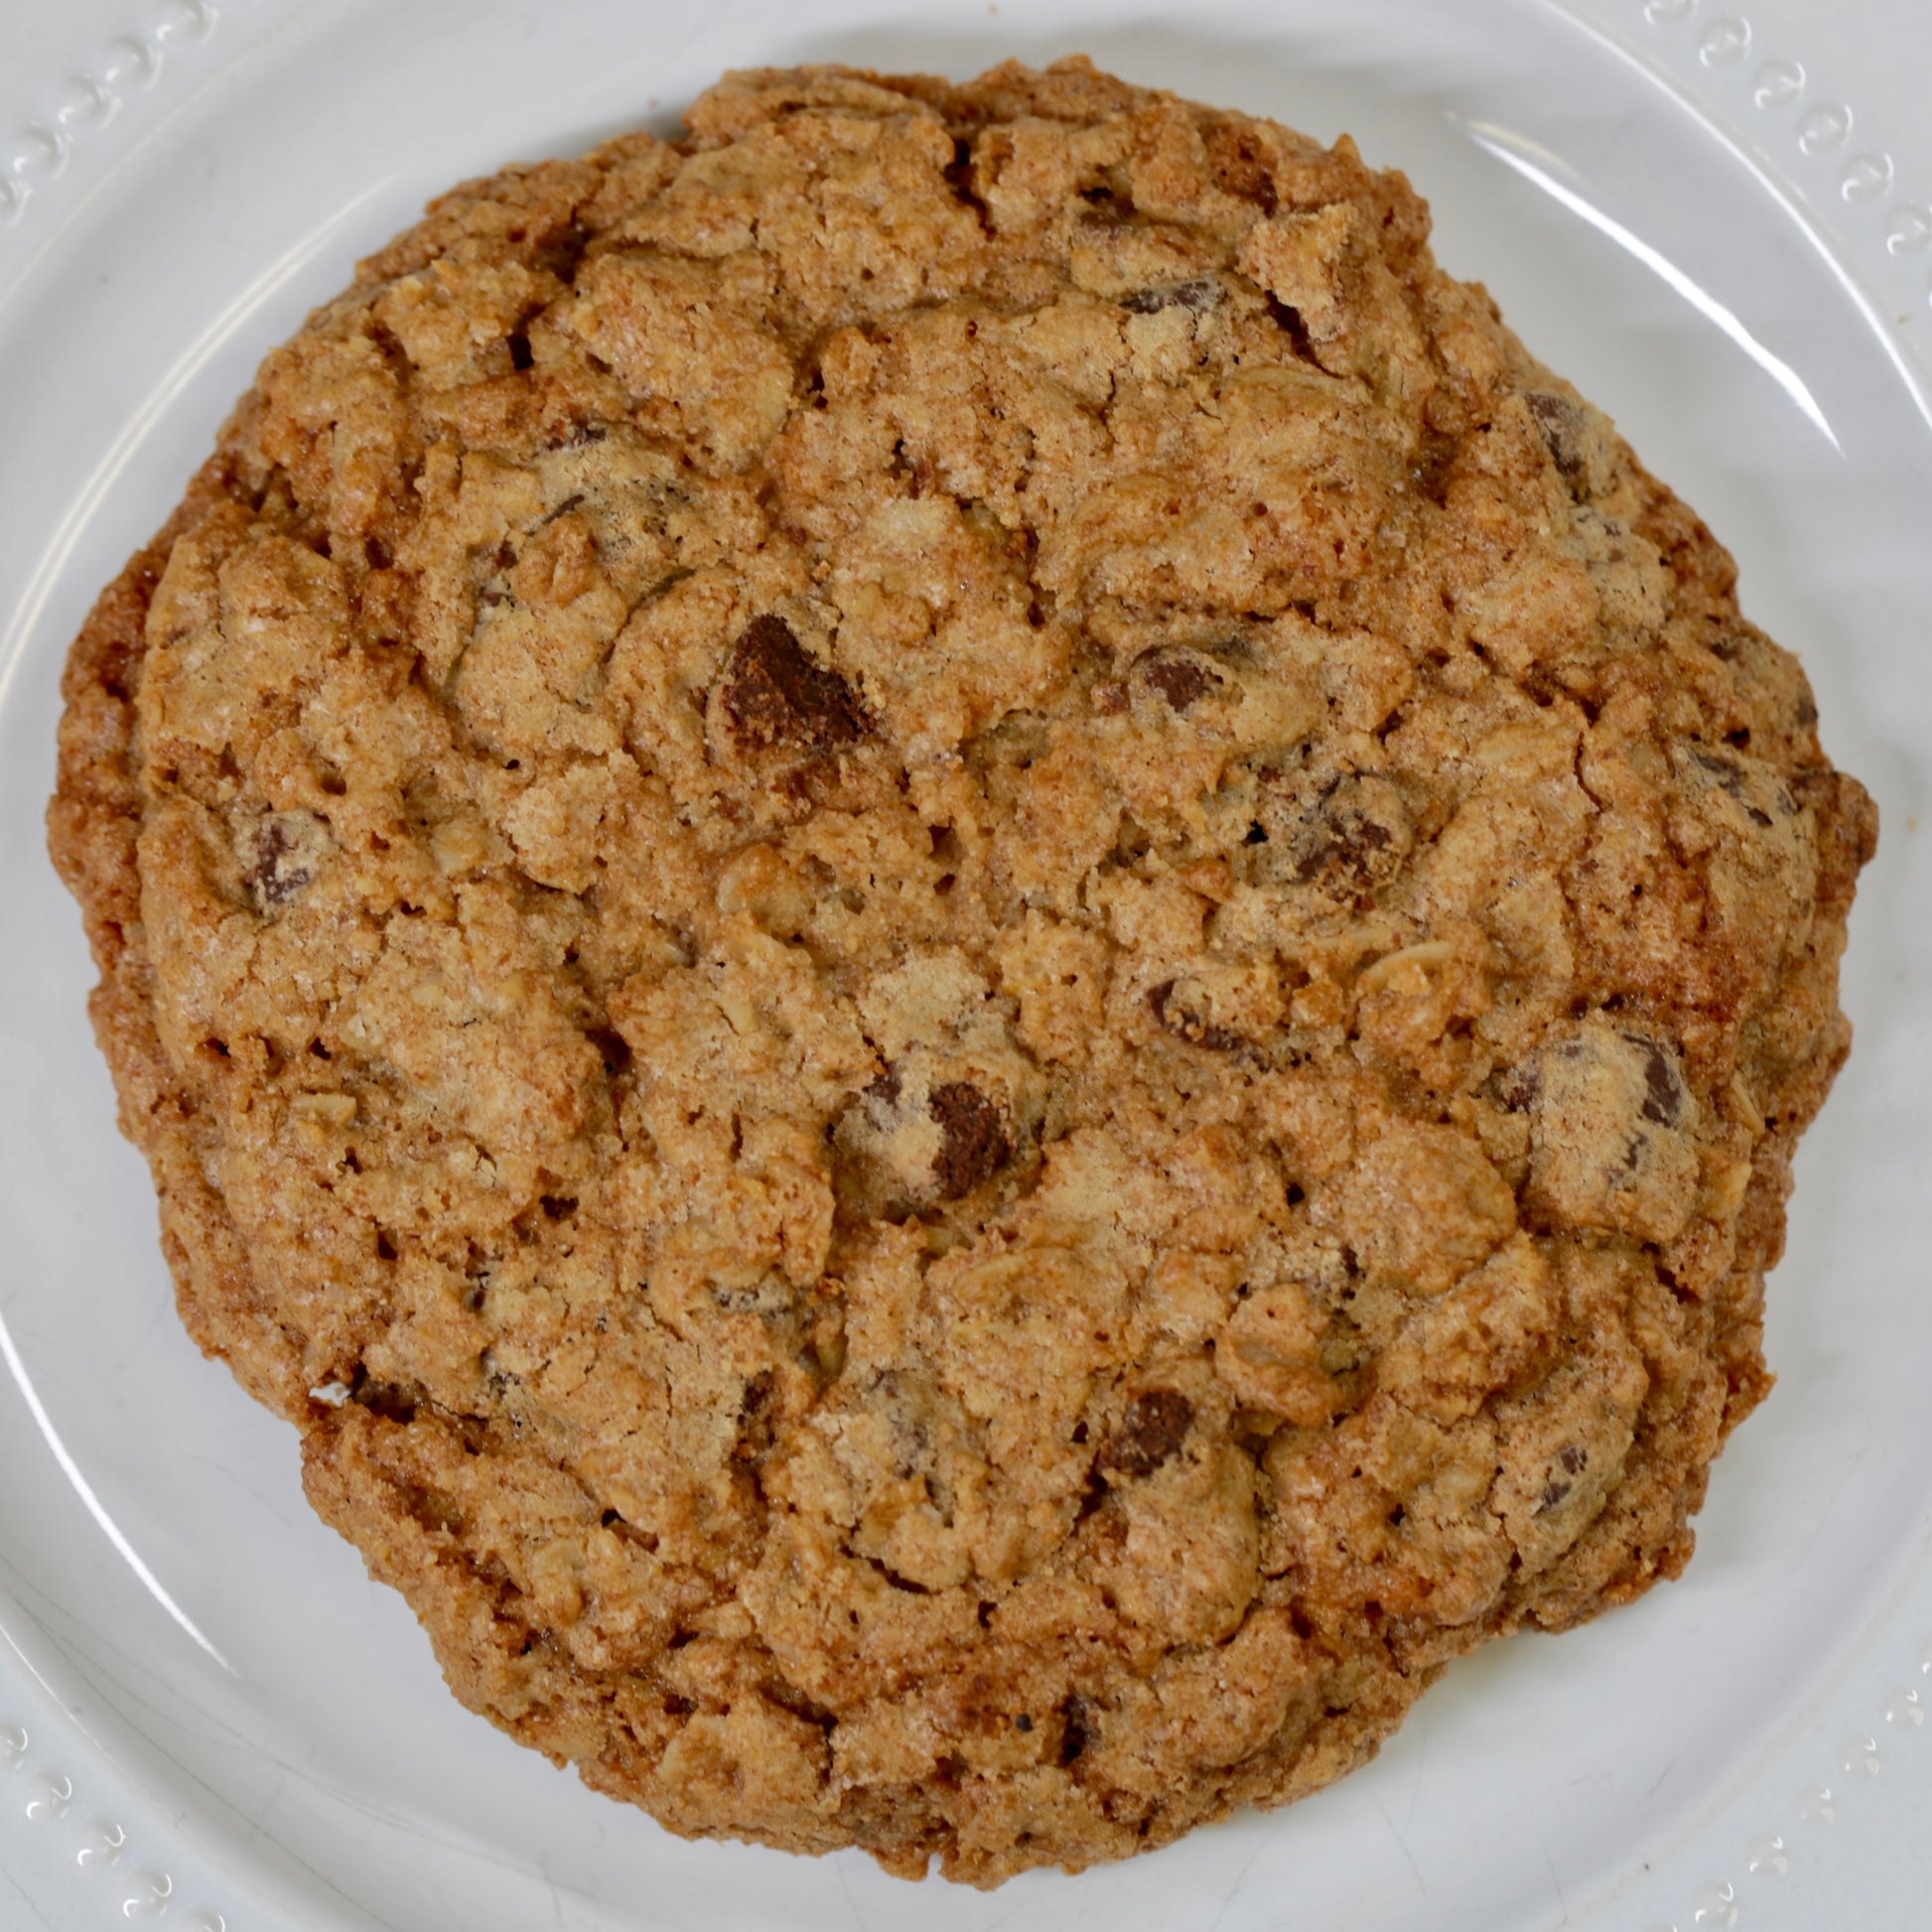 Soon to be world famous! Our whole wheat cookies are made with the best ingredients available, whole grain oats, Montana wheat flour, pure cream butter, molasses, and loaded with chocolate chips. Our best selling cookie! Big Sky Bread Company Whole Wheat Cookies